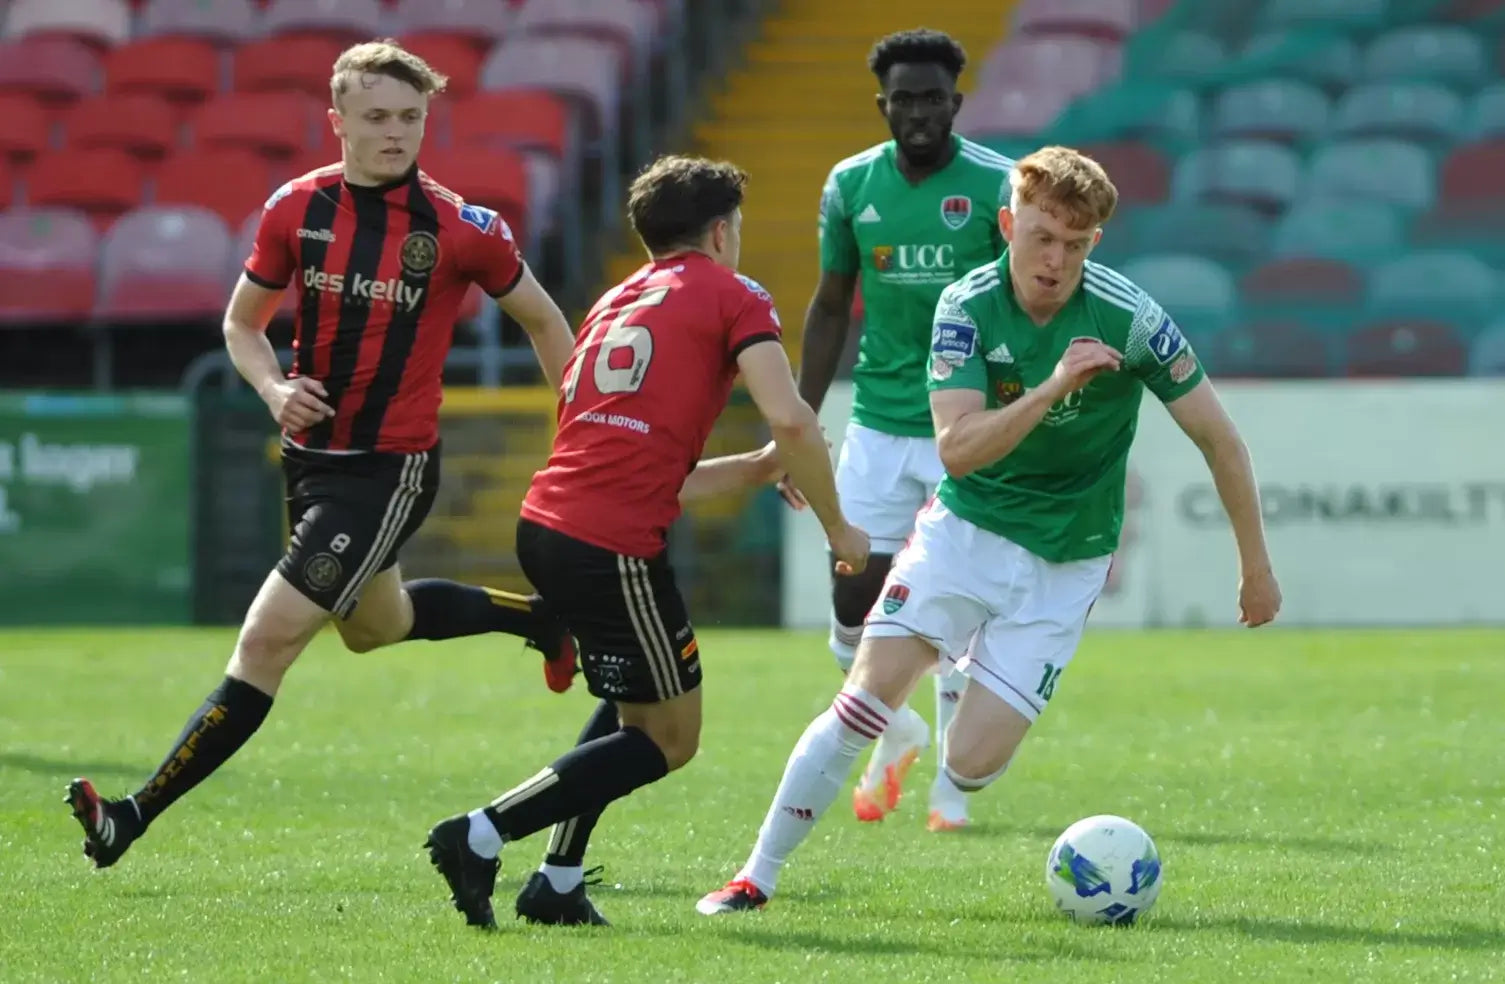 City Edition Preview - CCFC v Longford